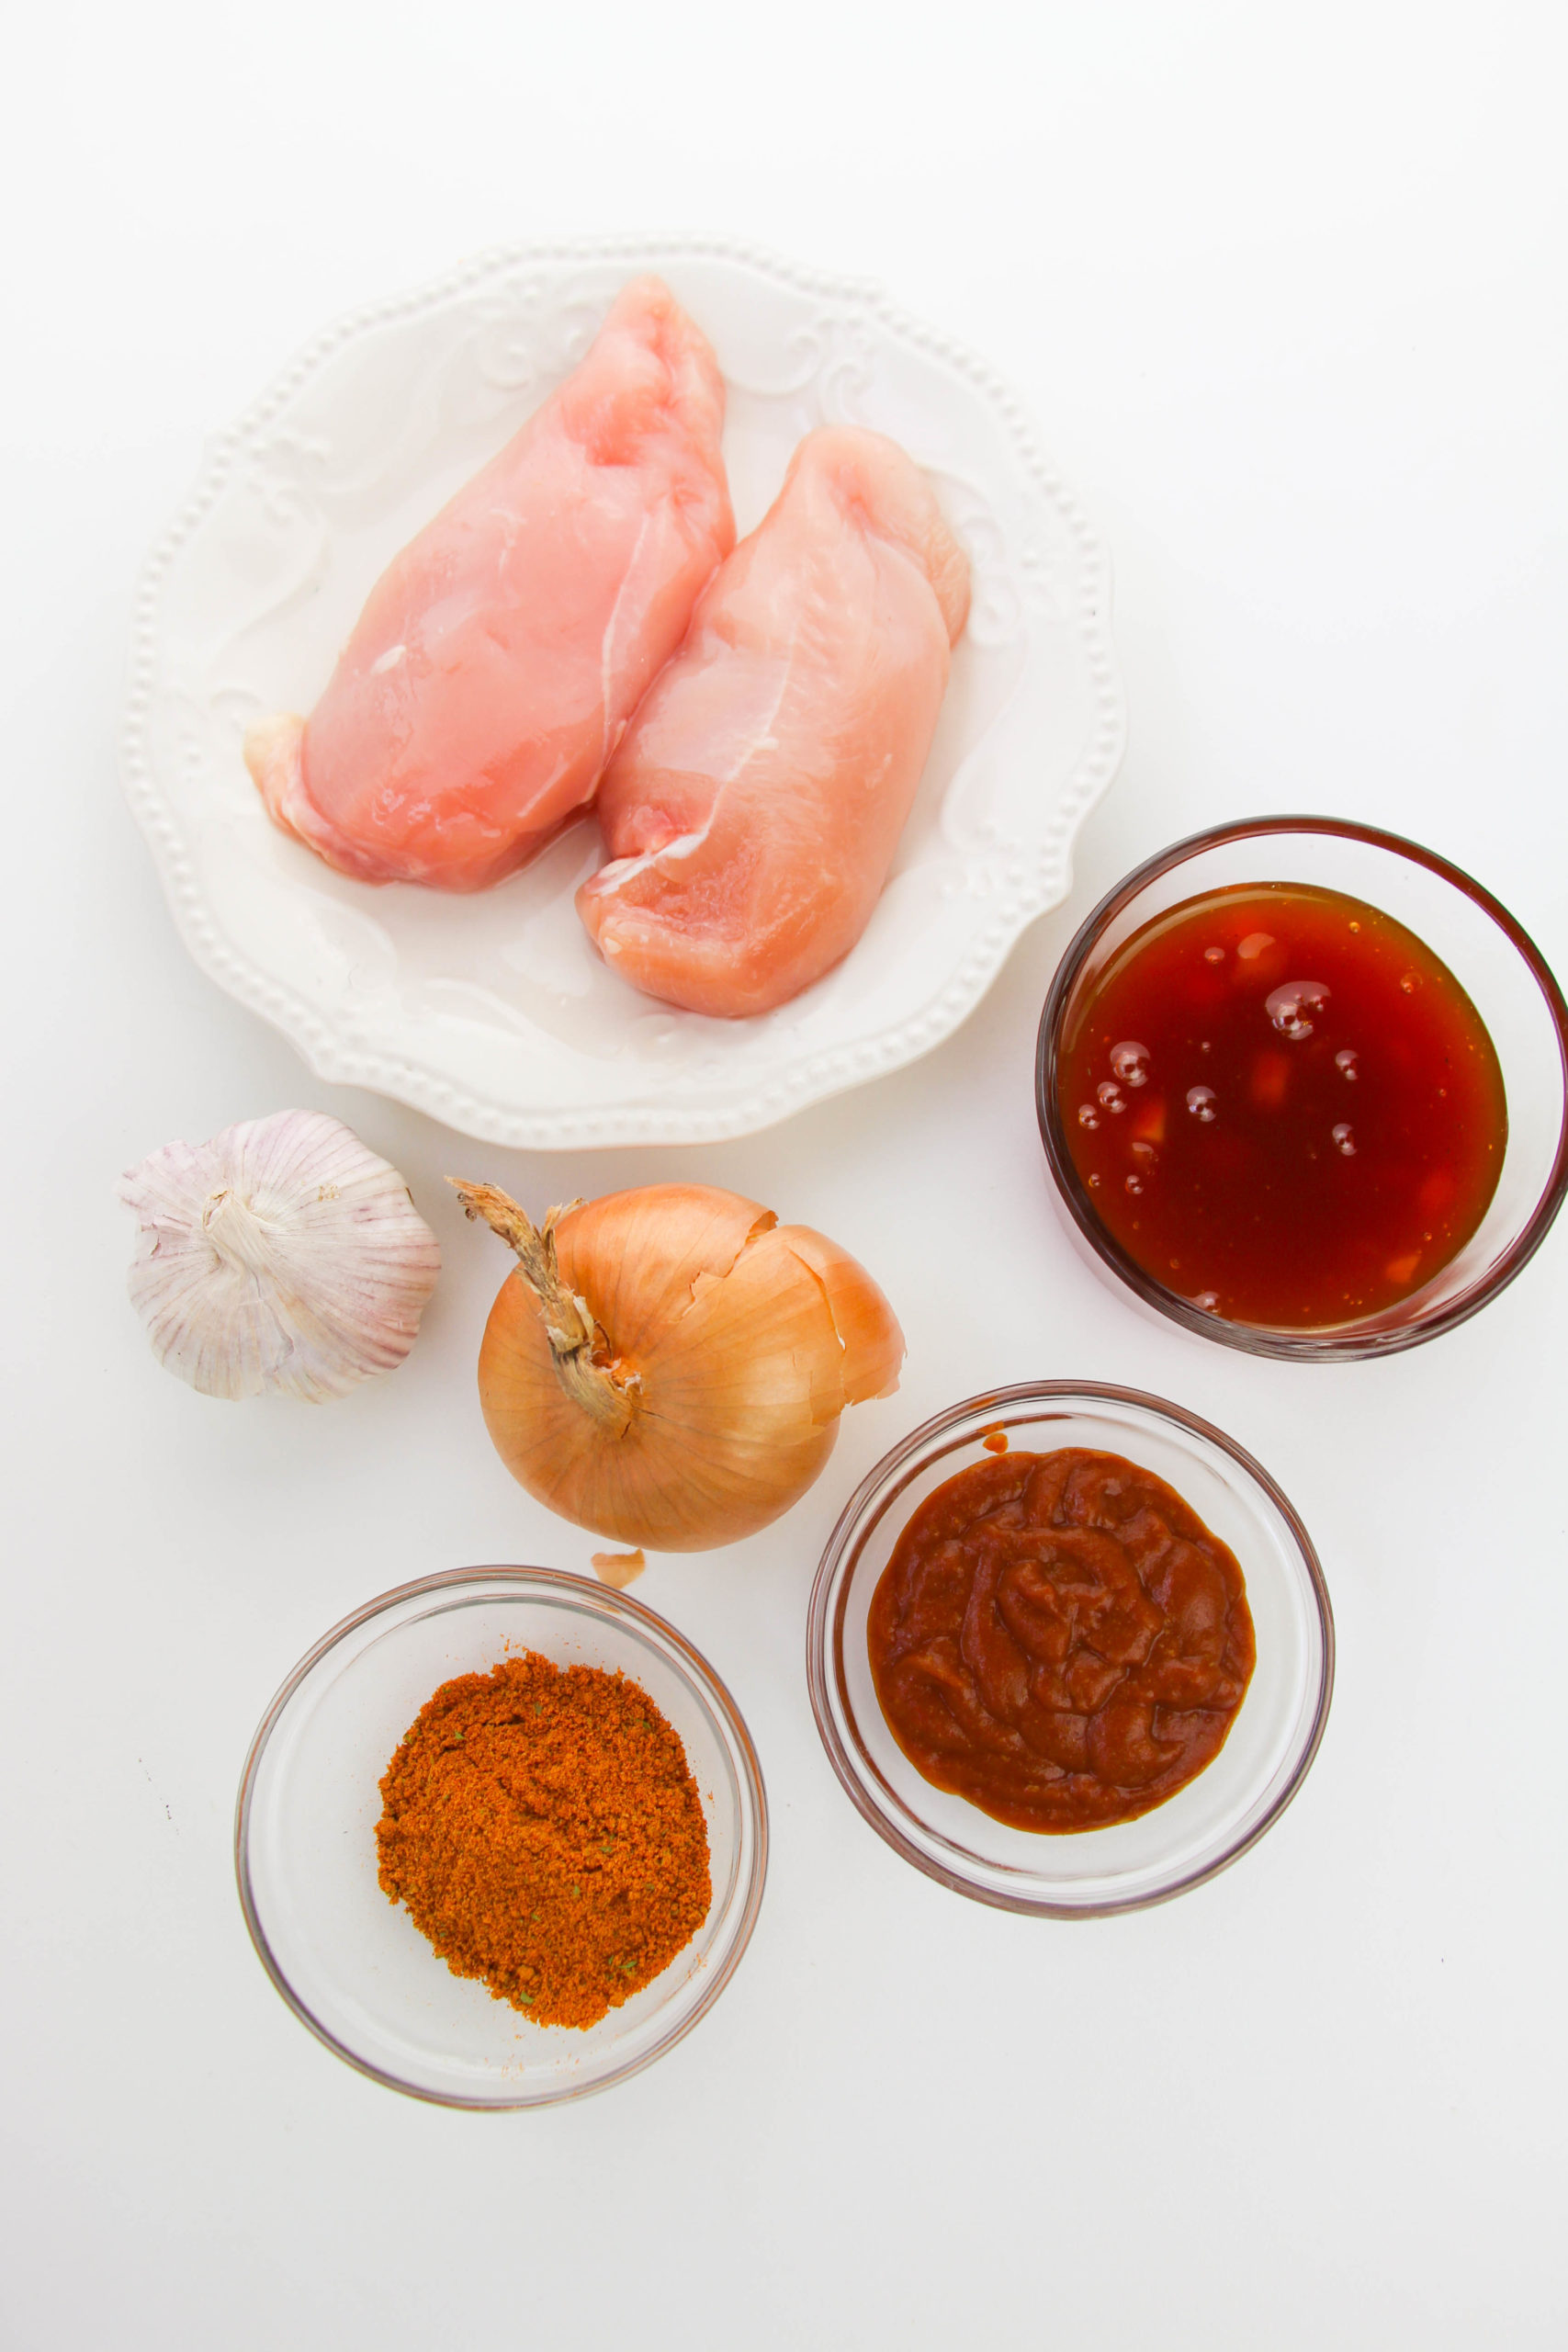 Chicken, spices and oil in bowls to make sauce.